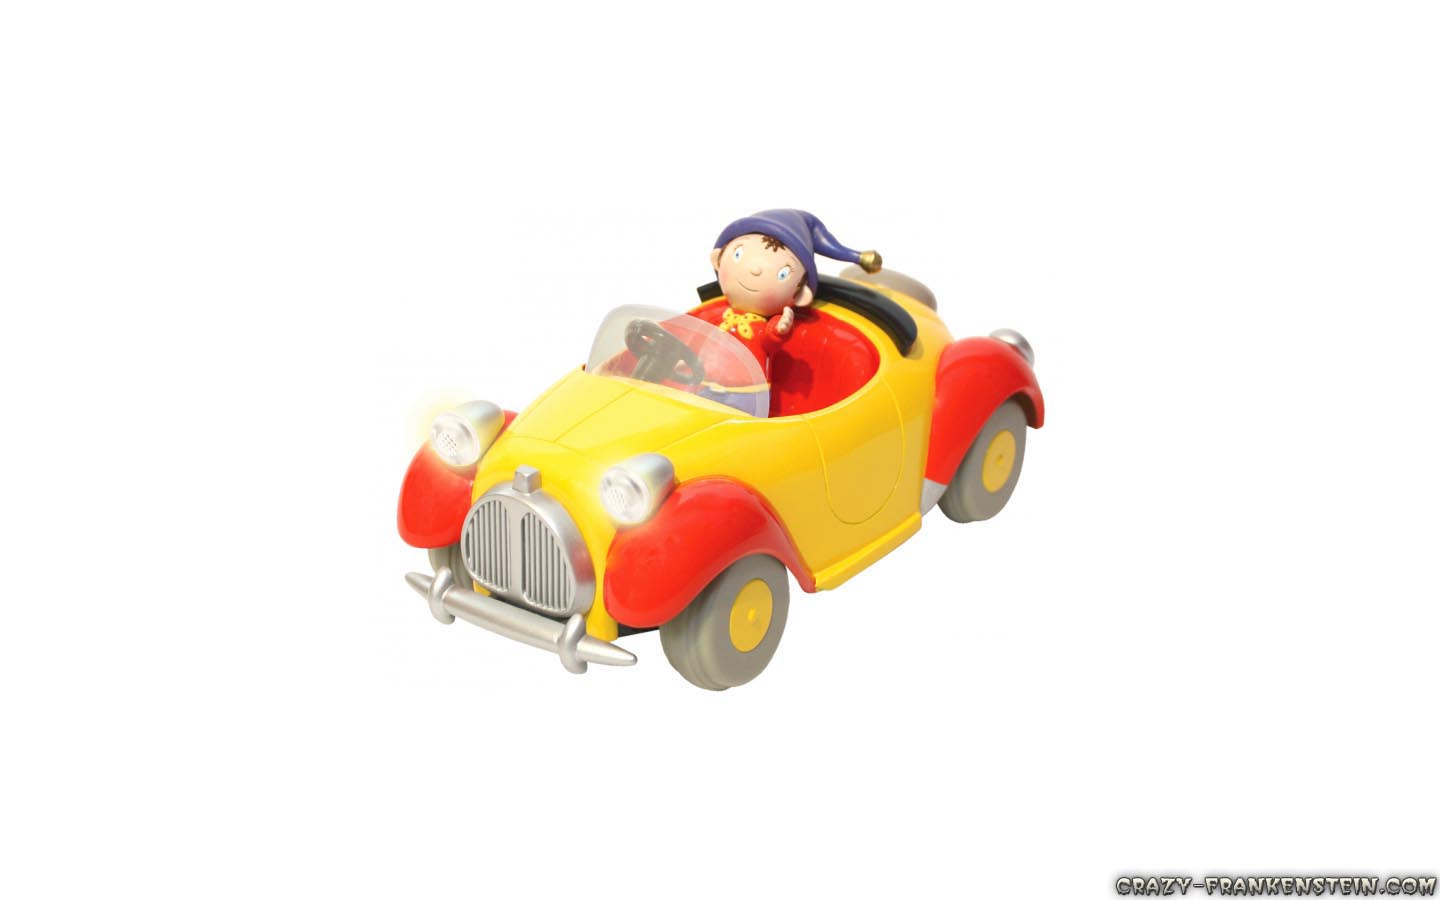 noddy toys remote control toys for kids wallpapers 1440x900jpg